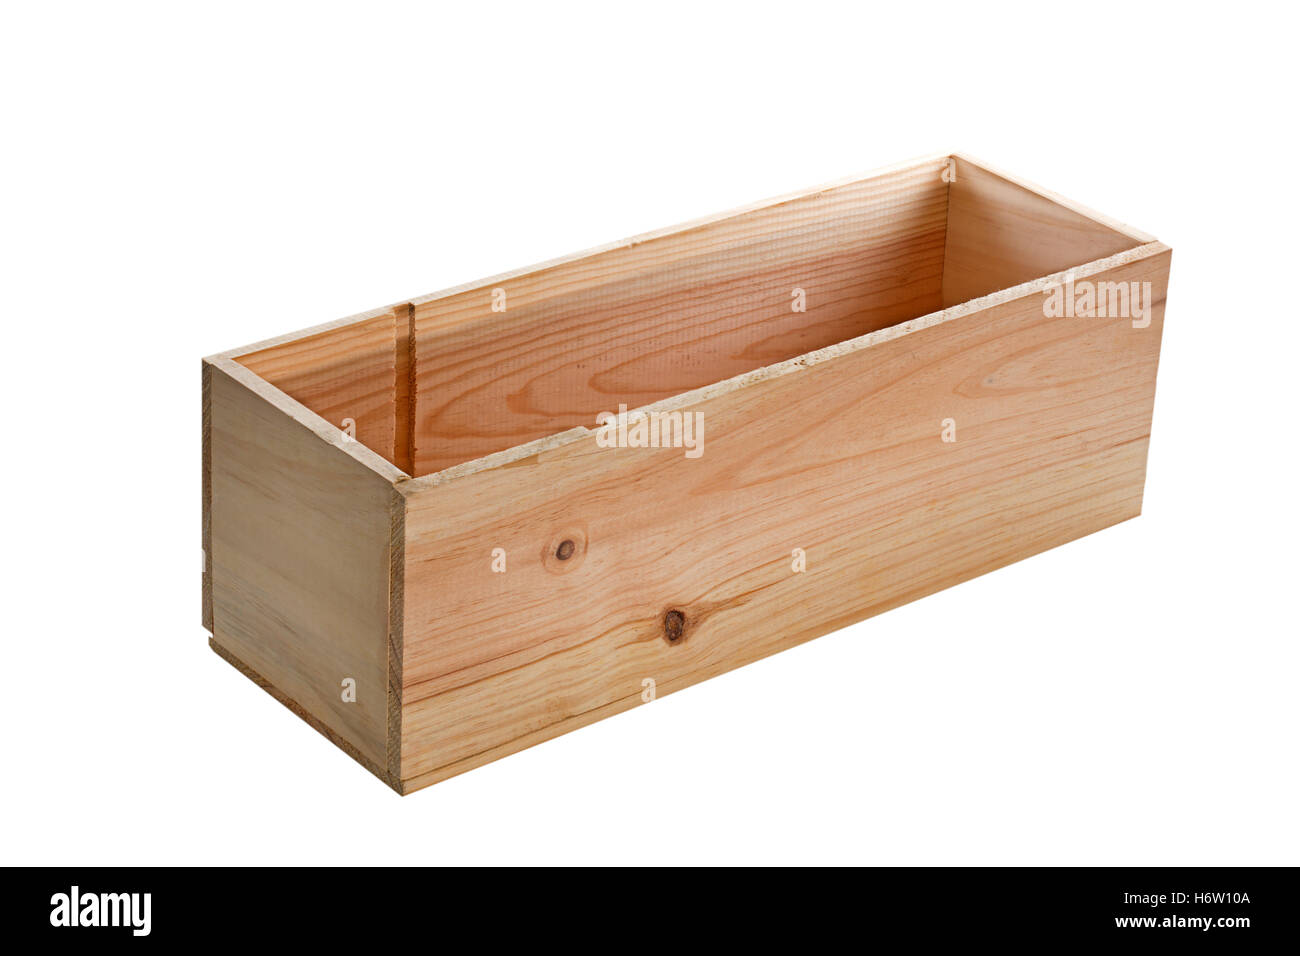 https://c8.alamy.com/comp/H6W10A/small-wooden-box-with-lid-open-H6W10A.jpg